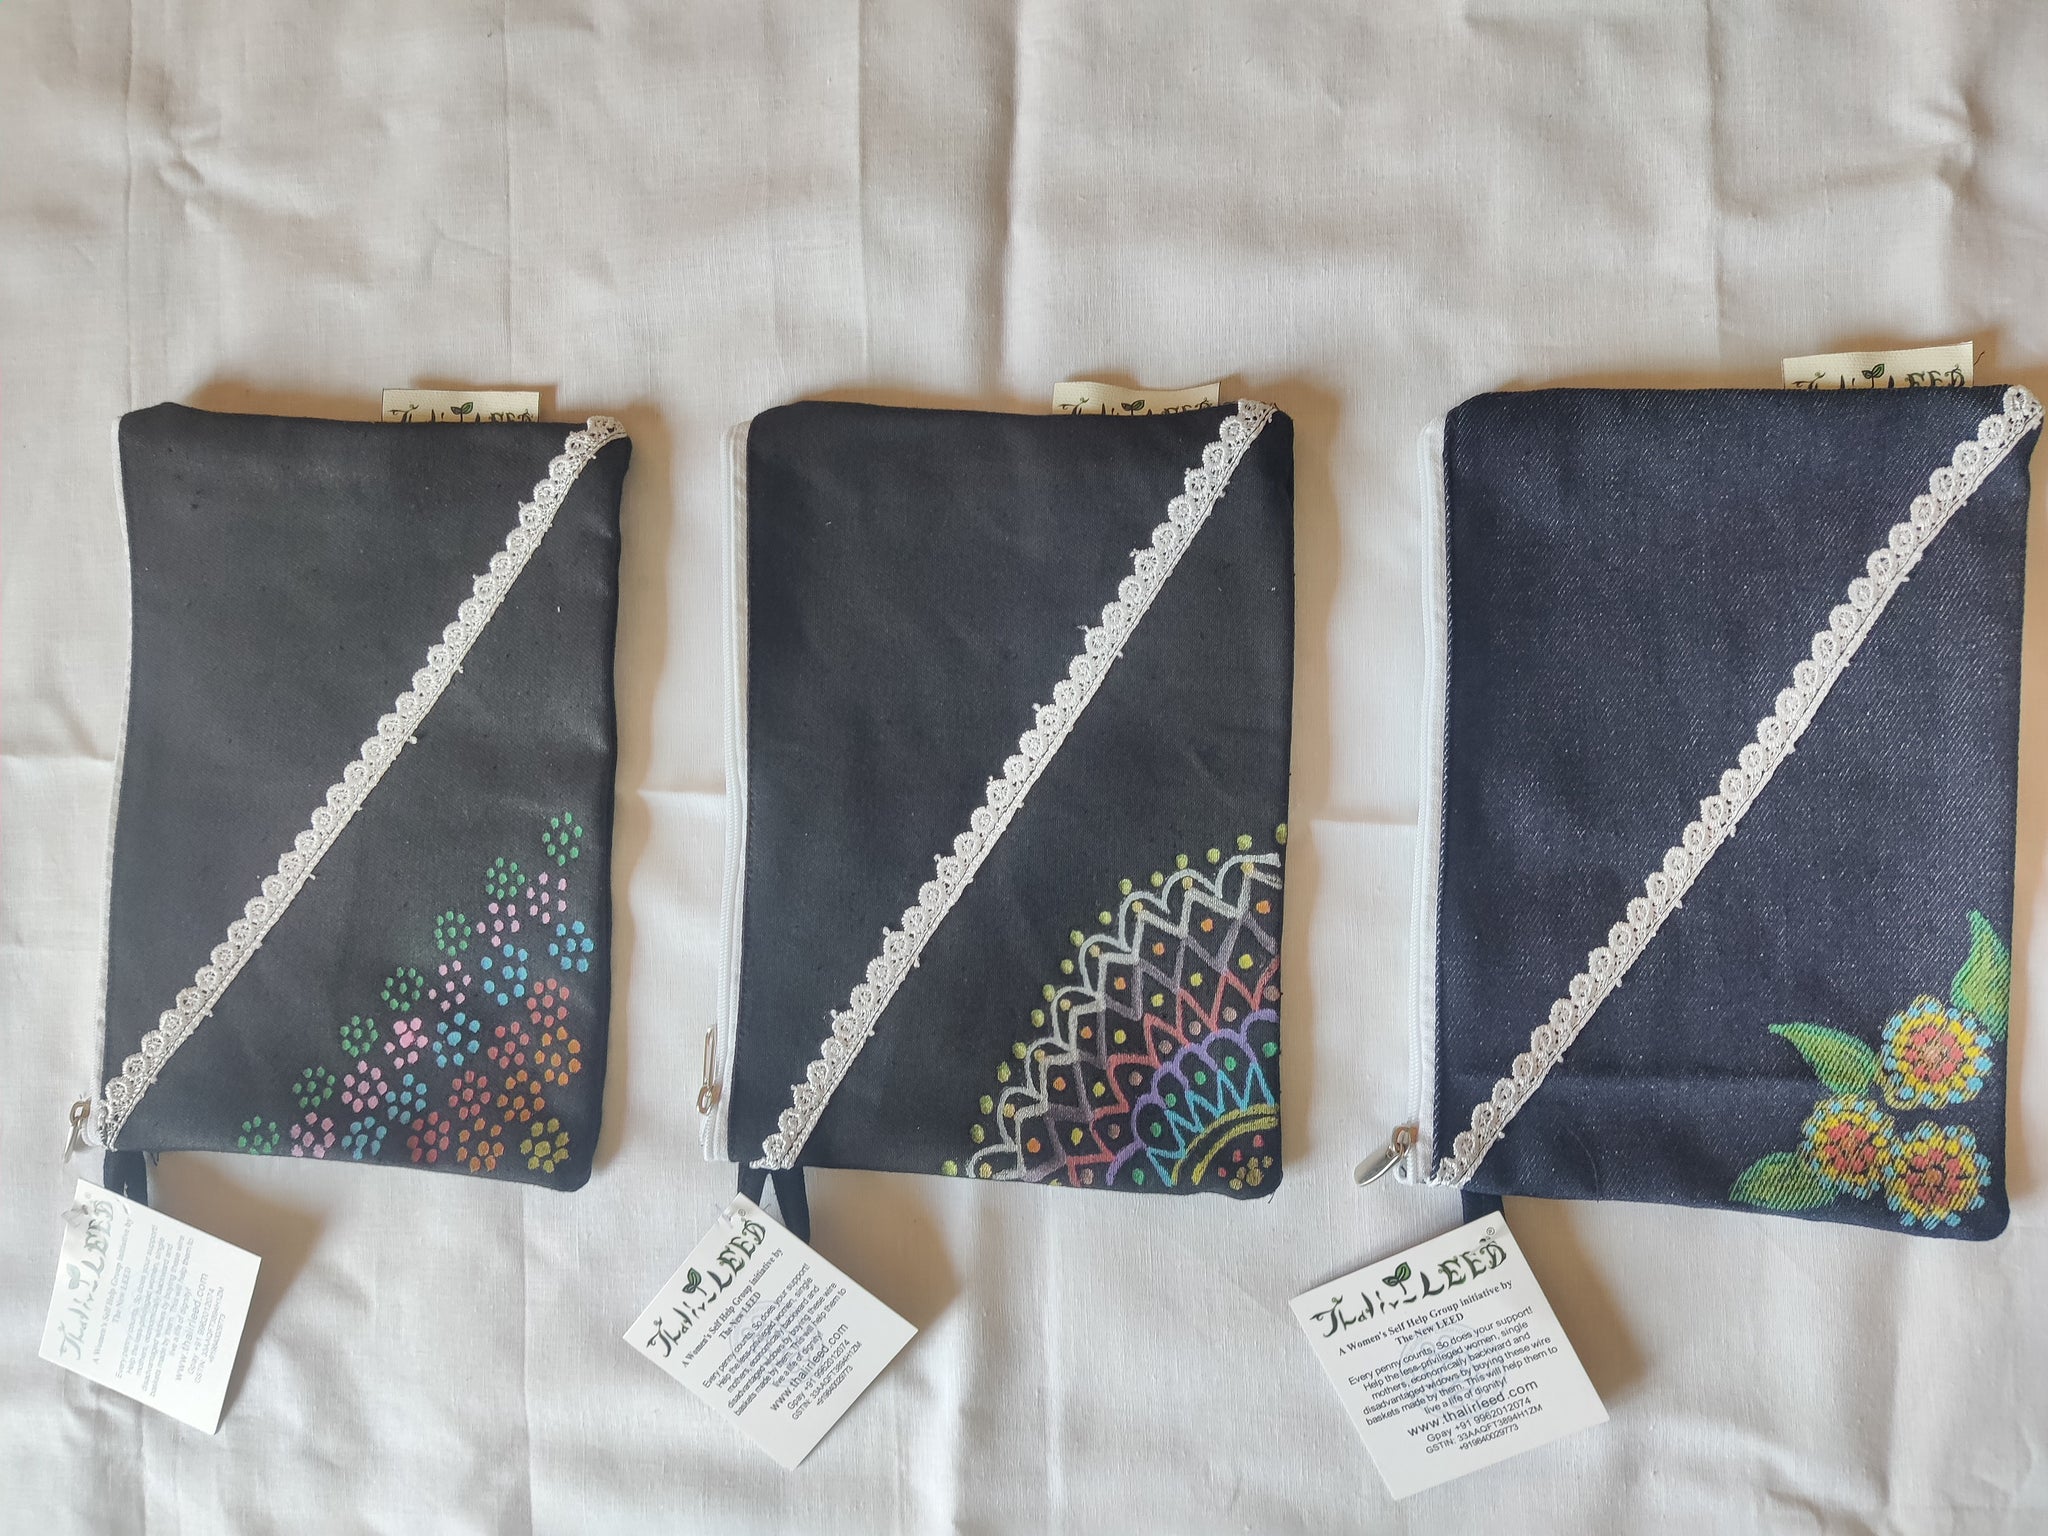 TLDIY-003c-Versatile Pouches in Canvas-DIY-painted